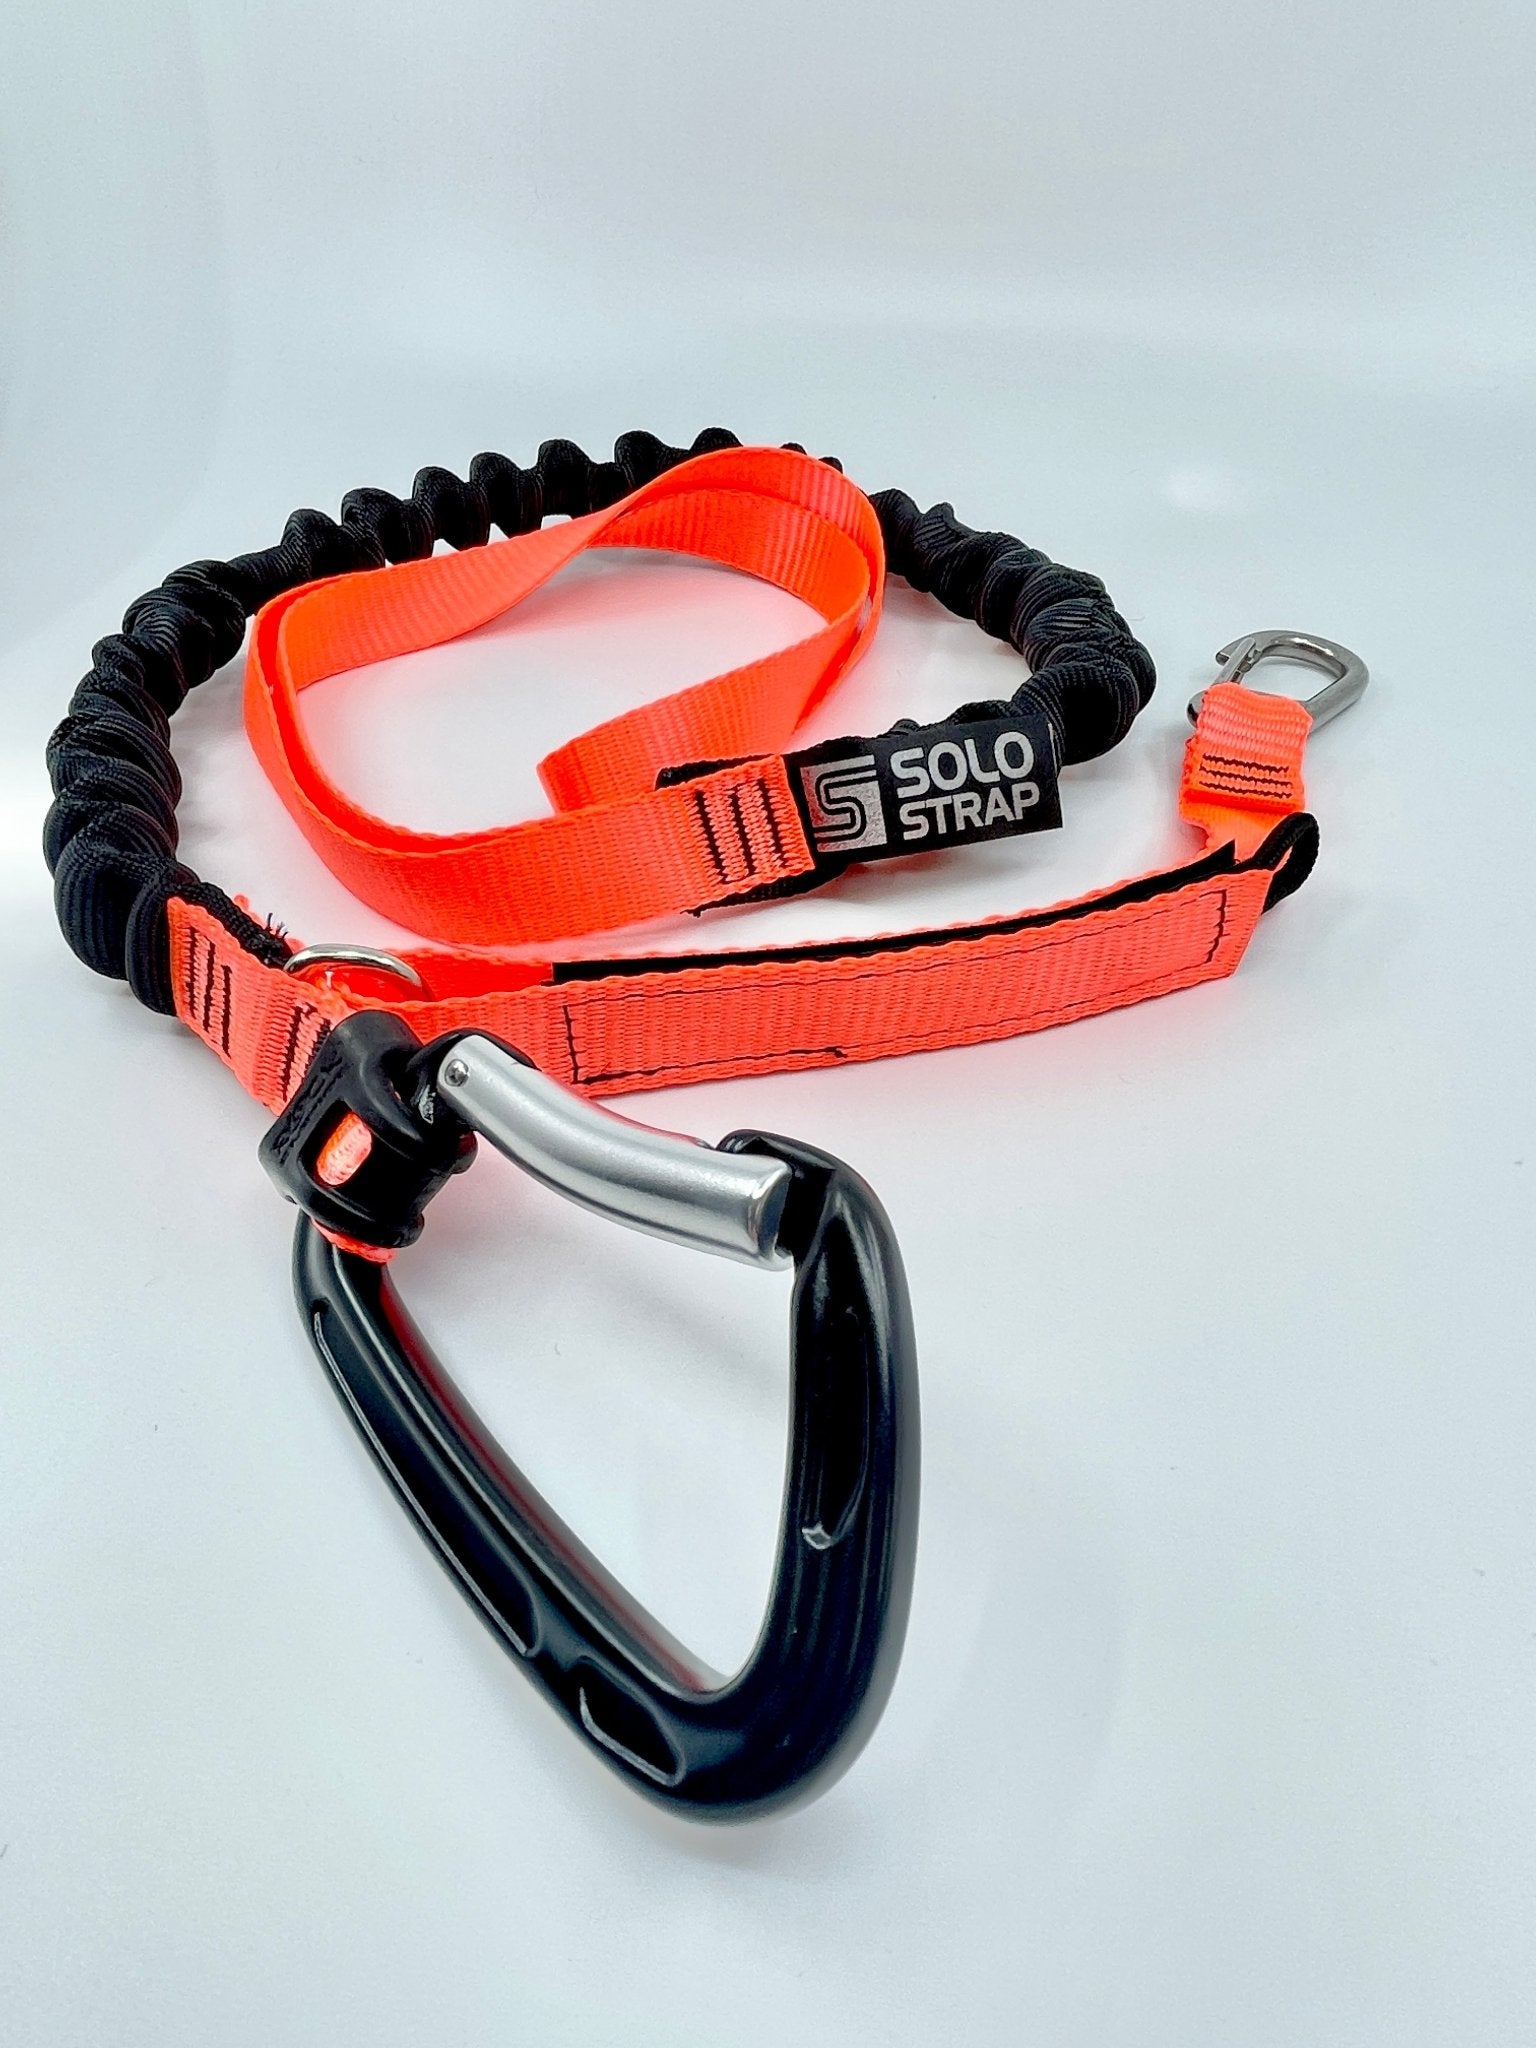 ‘Only One’ DUAL CONNECTION SELF-LAUNCH KITE LEASH - Worthing Watersports - - Solo-Strap